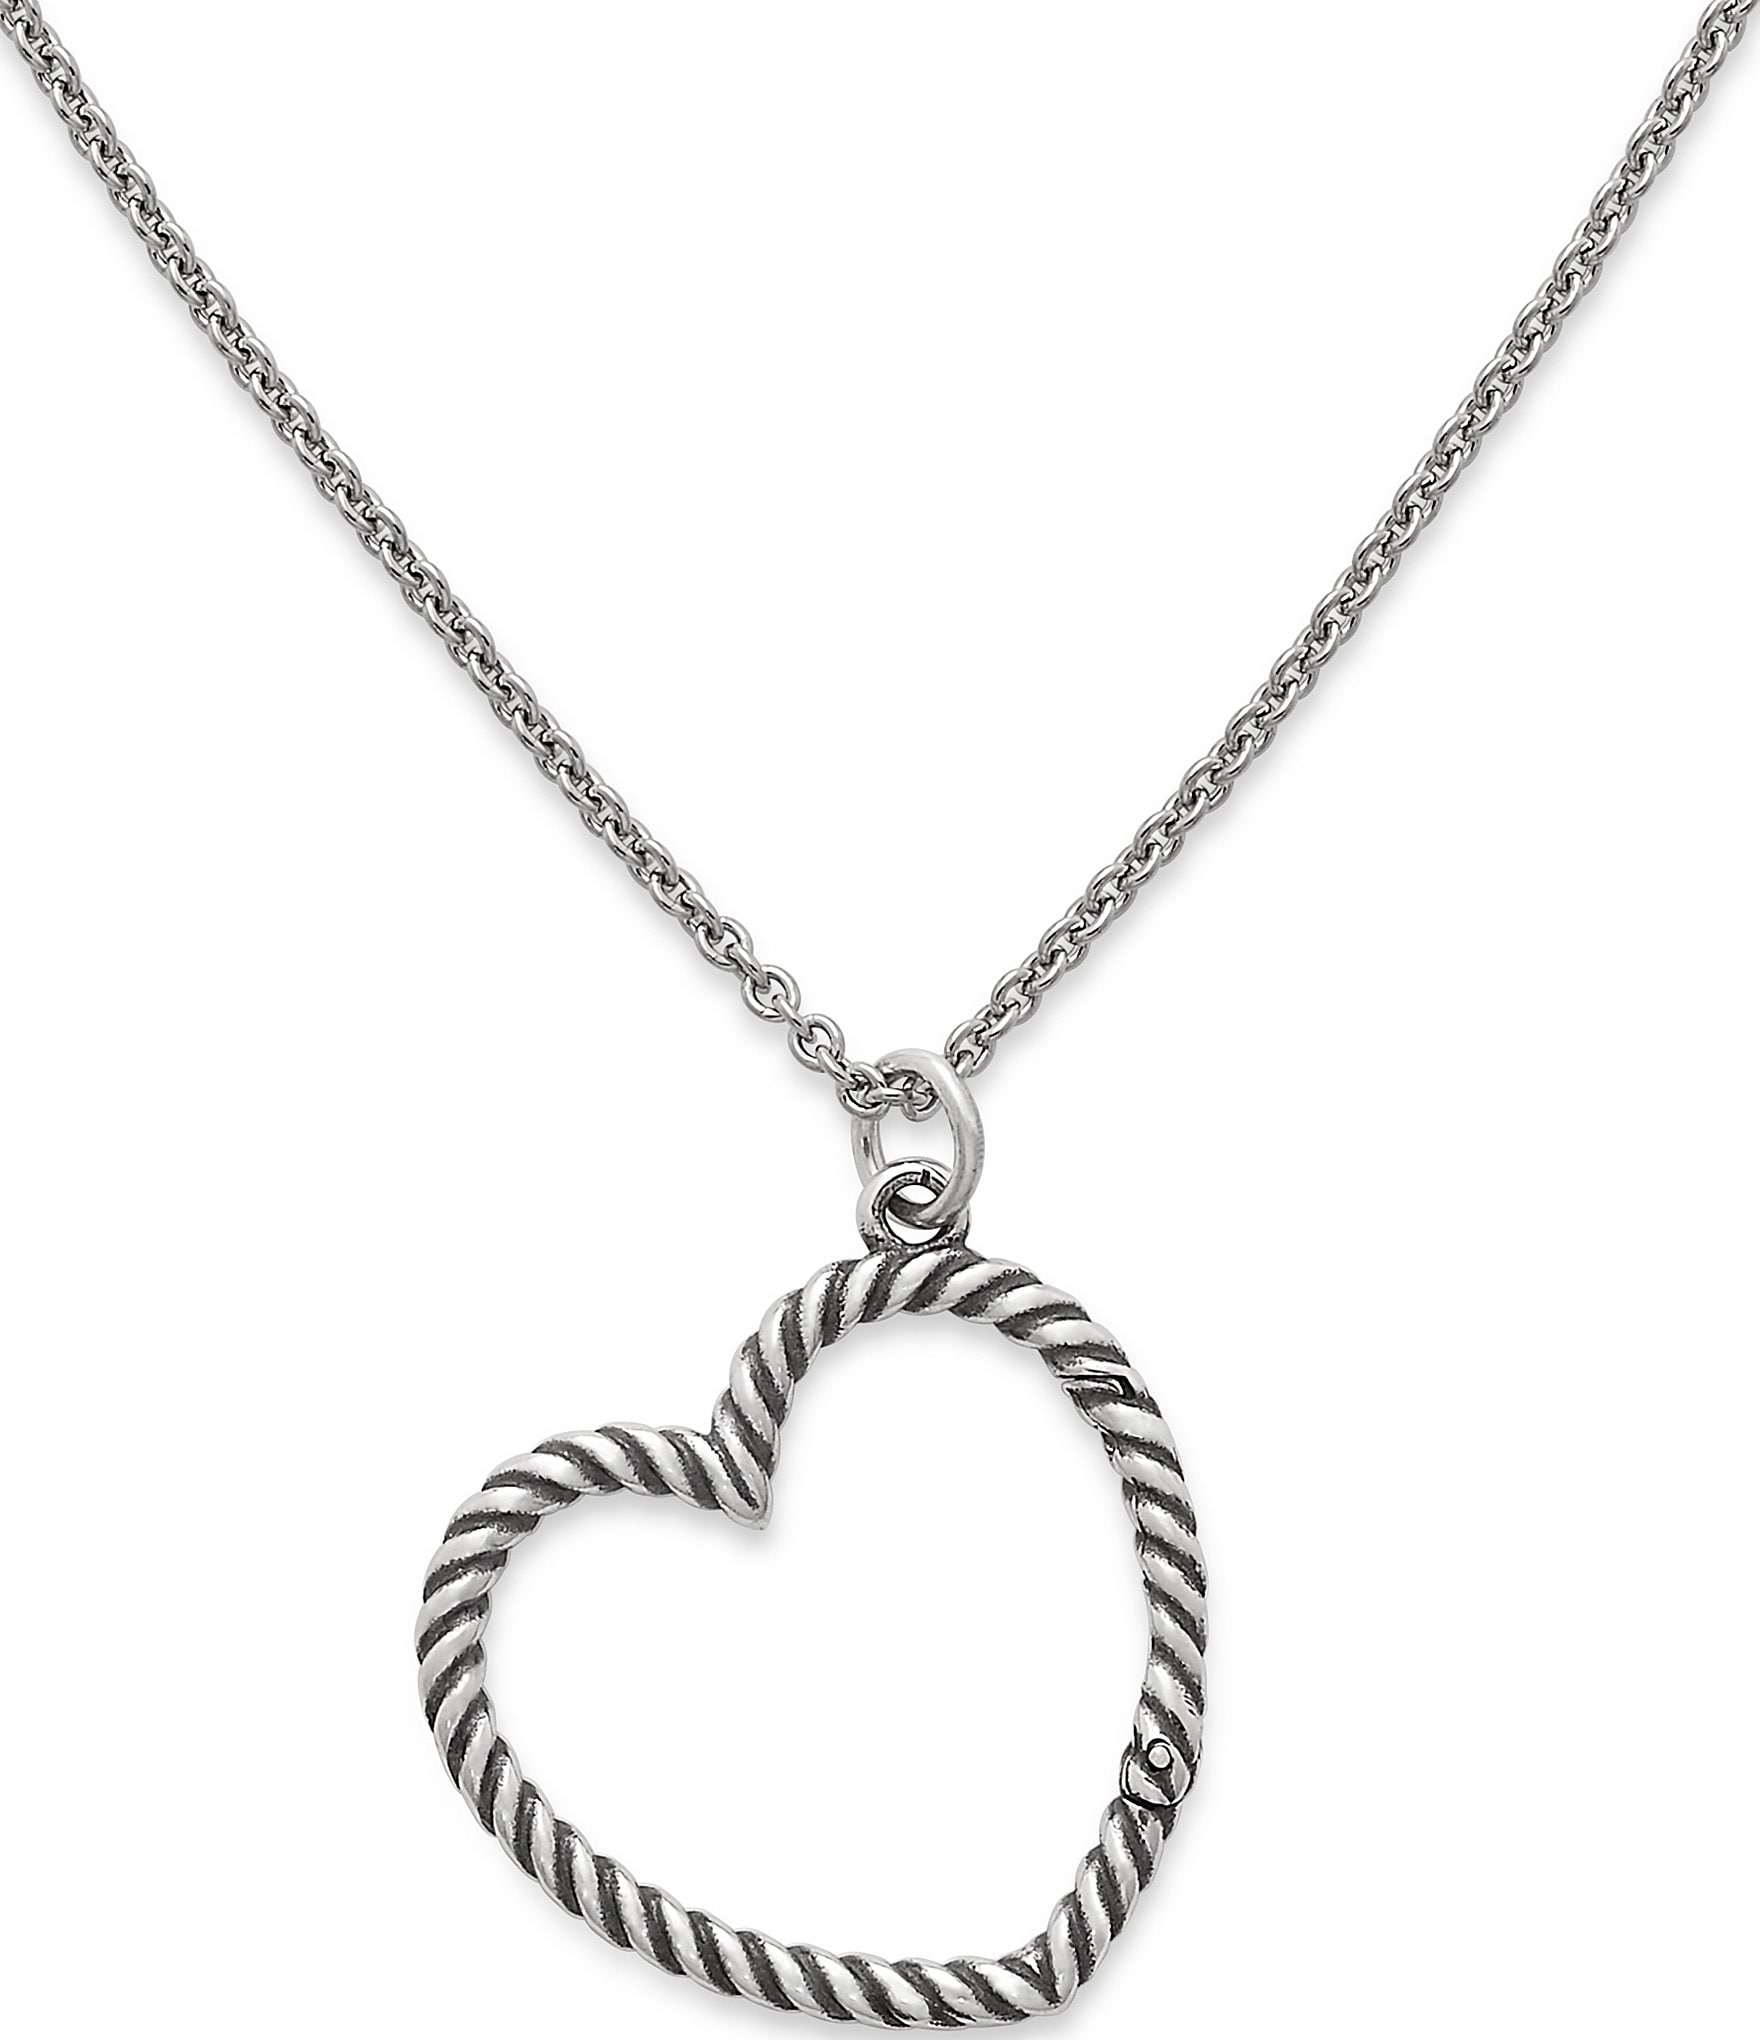 James Avery Changeable Heart Charm Holder Necklace - 16 in.